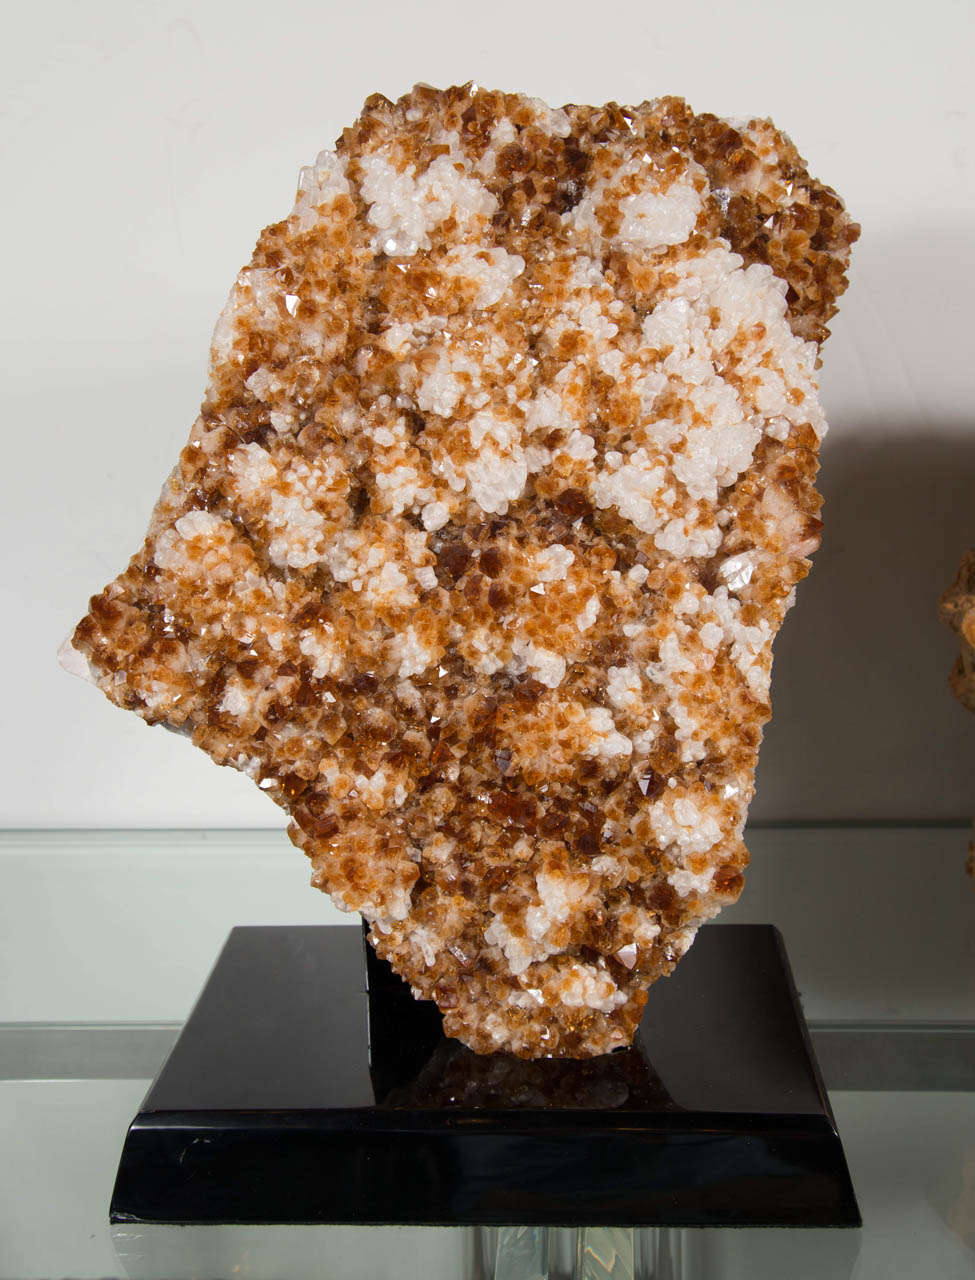 This large sliced citrine crystal specimen with brilliant colors has a beautiful organic shape and features amber and gold tones and will work as a centerpiece in any design. It is mounted on an ebonized walnut pedestal.